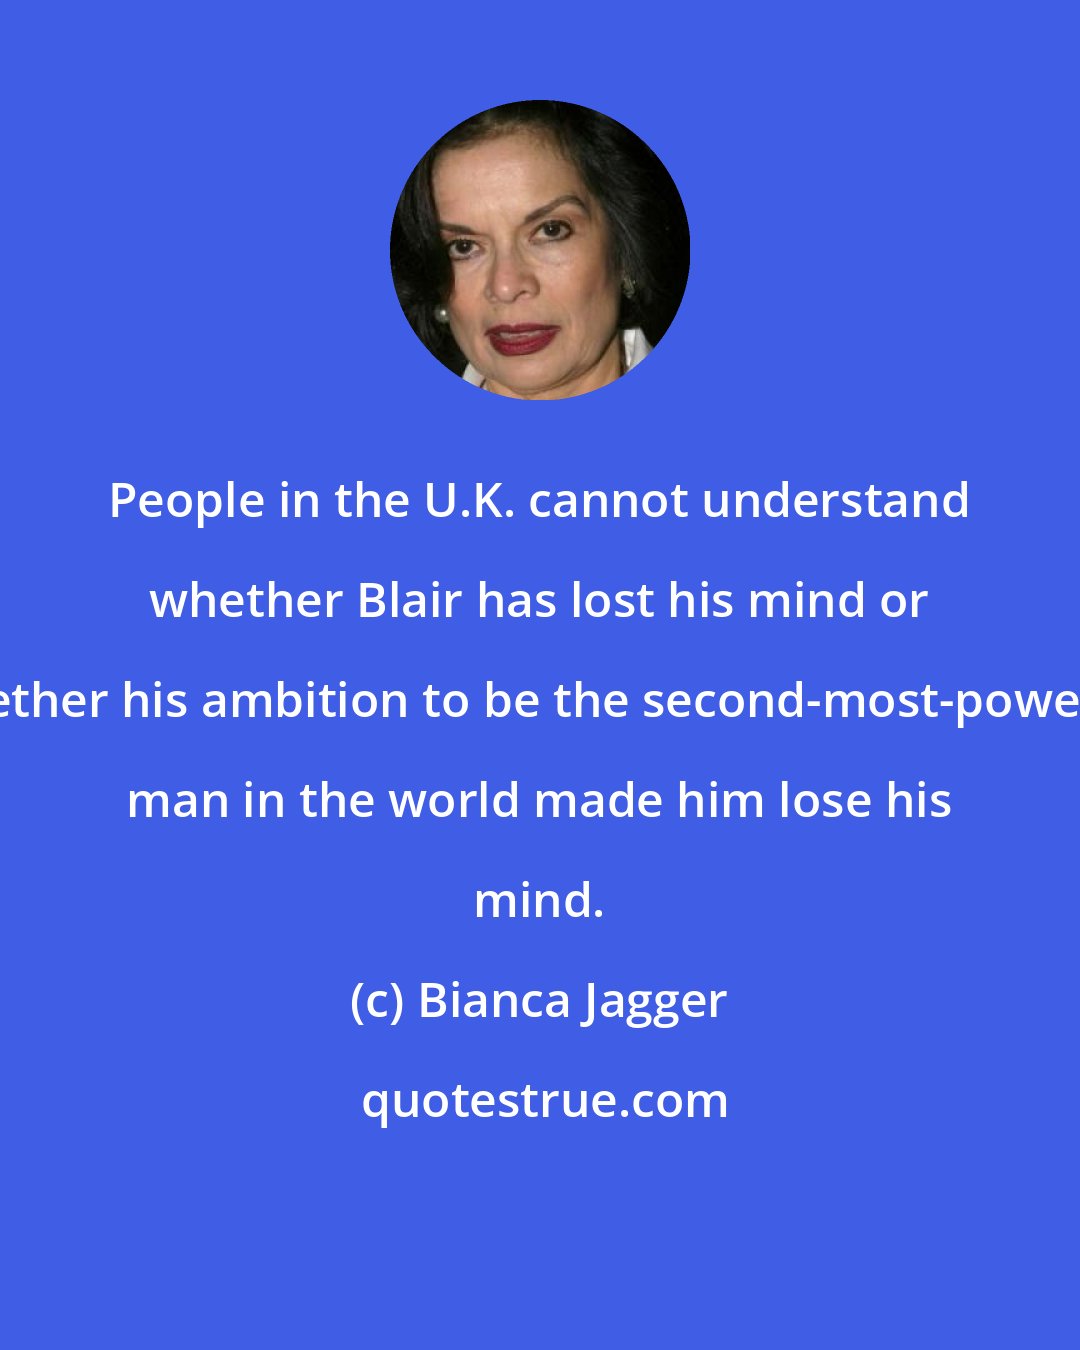 Bianca Jagger: People in the U.K. cannot understand whether Blair has lost his mind or whether his ambition to be the second-most-powerful man in the world made him lose his mind.